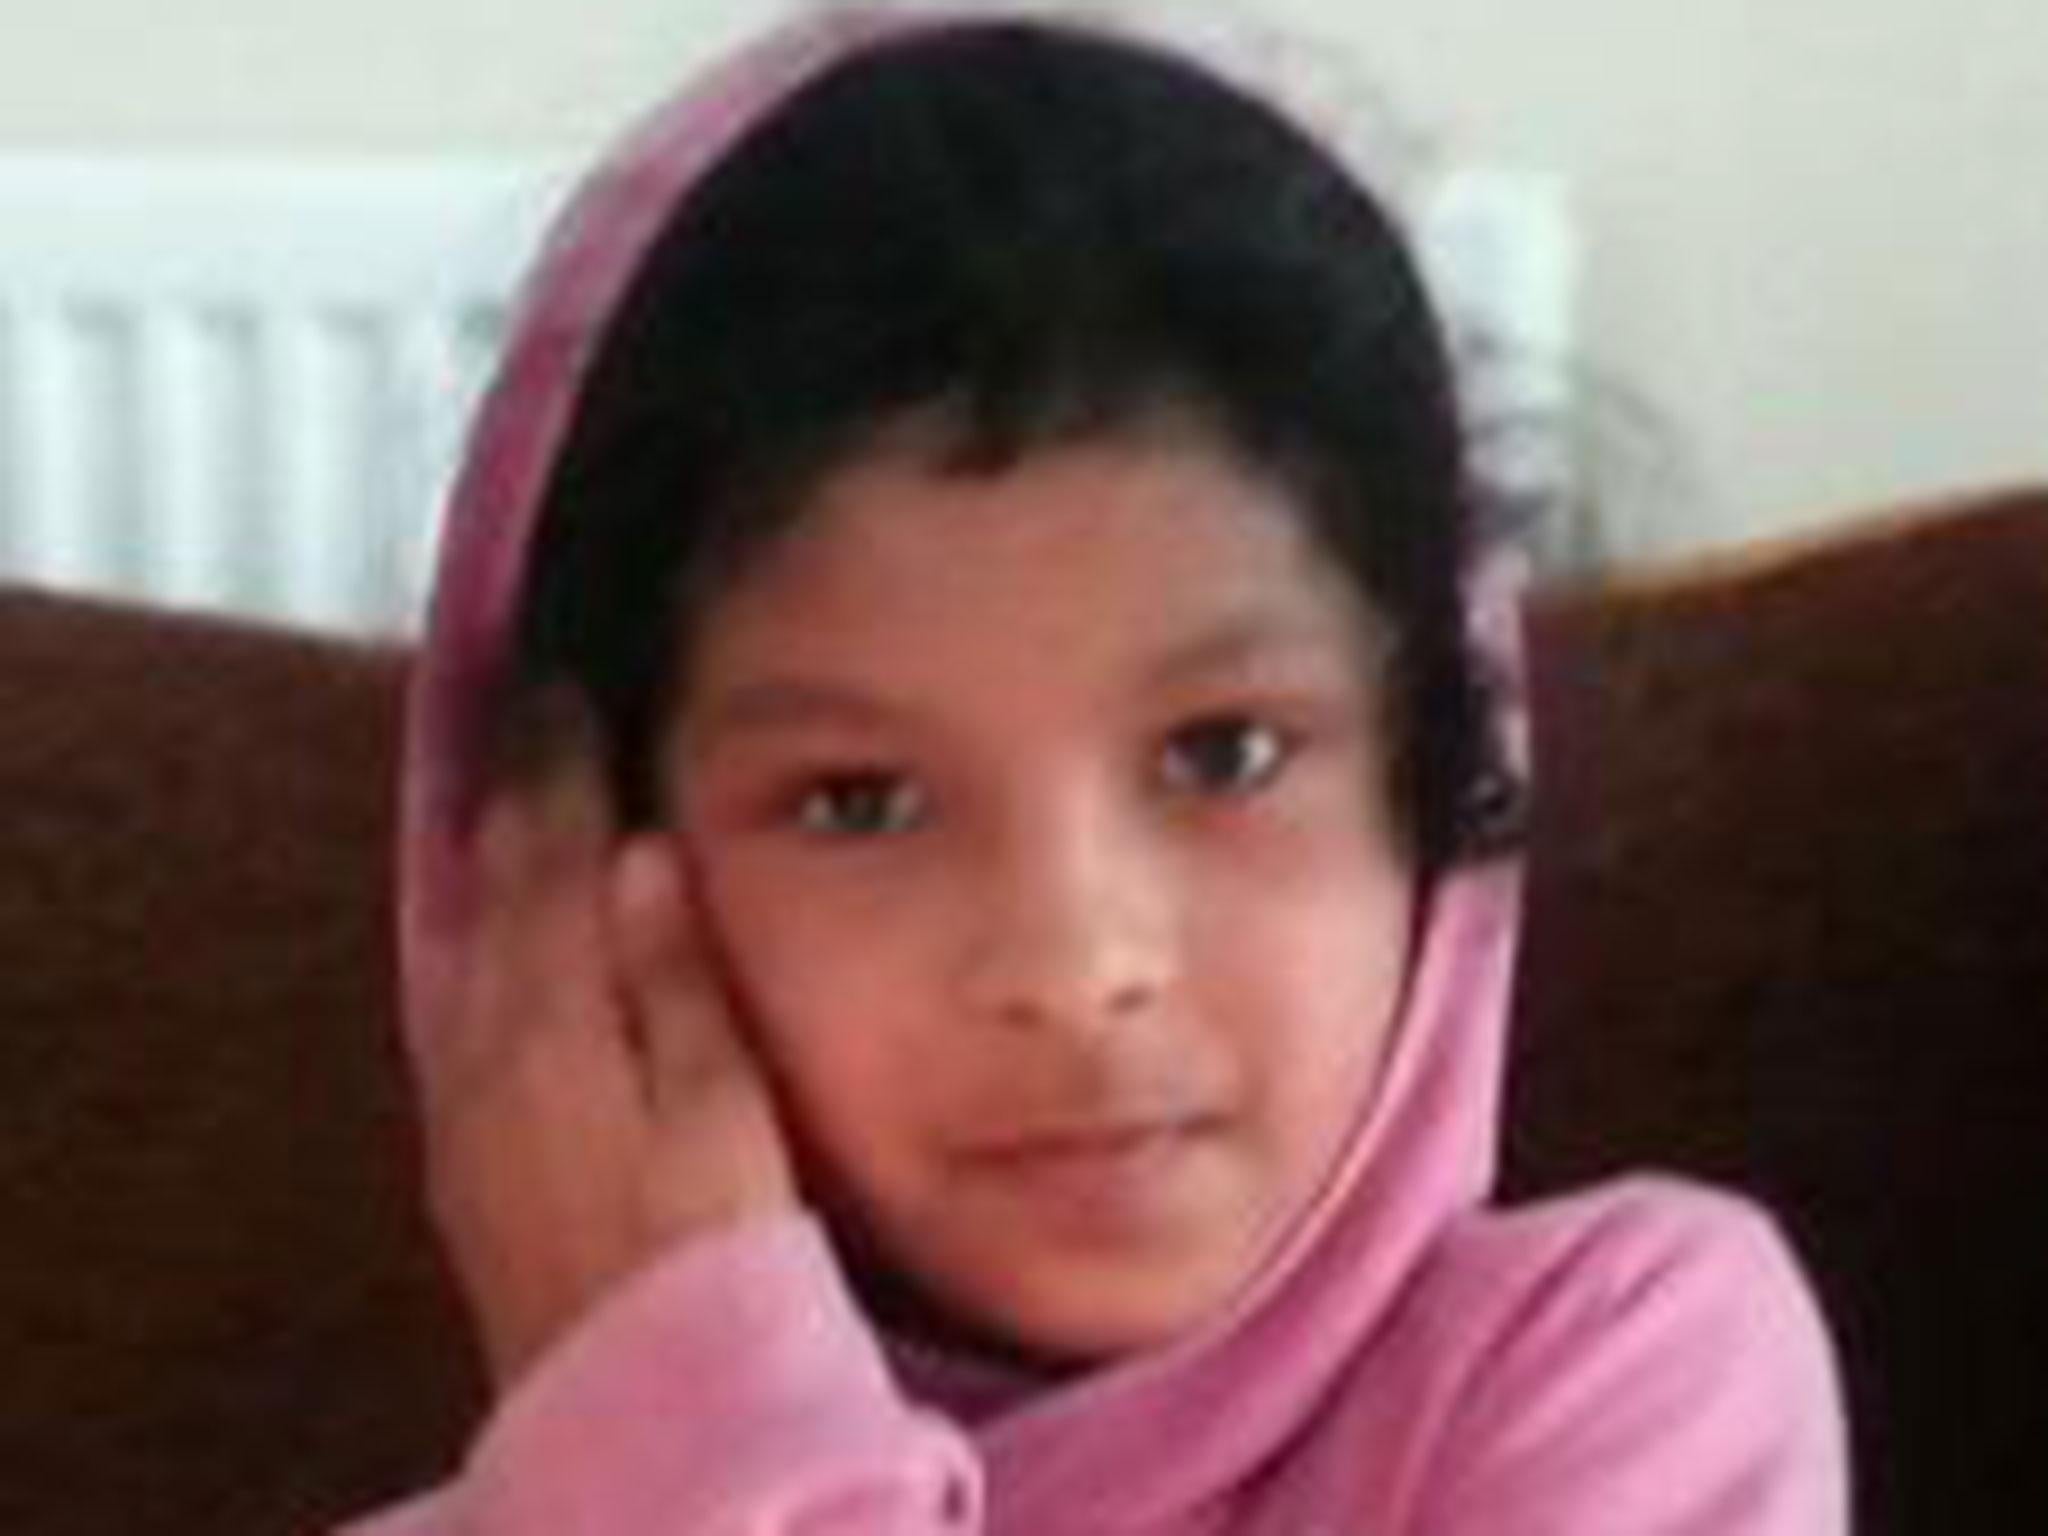 Evha Jannath 11 Year Old Girl Who Died At Drayton Manor Theme Park Has Been Named The Independent